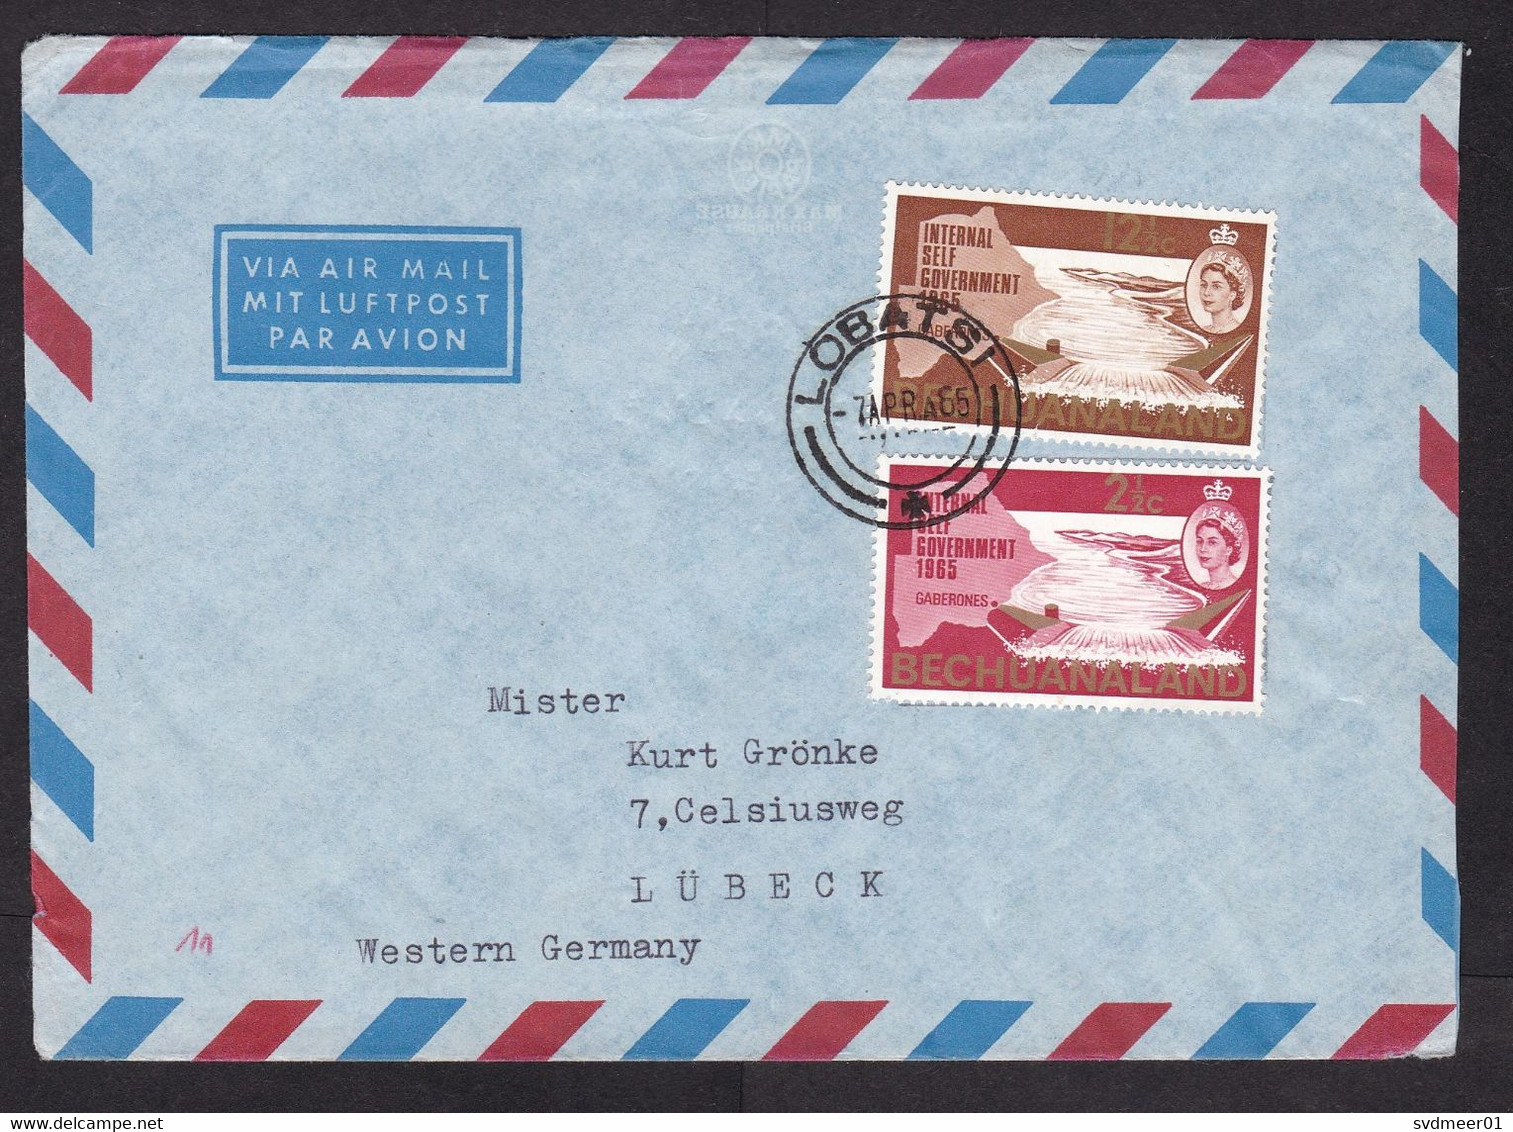 Bechuanaland: Airmail Cover To Germany, 1965, 2 Stamps, Dam, Self Government, Queen Elizabeth (minor Damage) - 1965-1966 Self Government